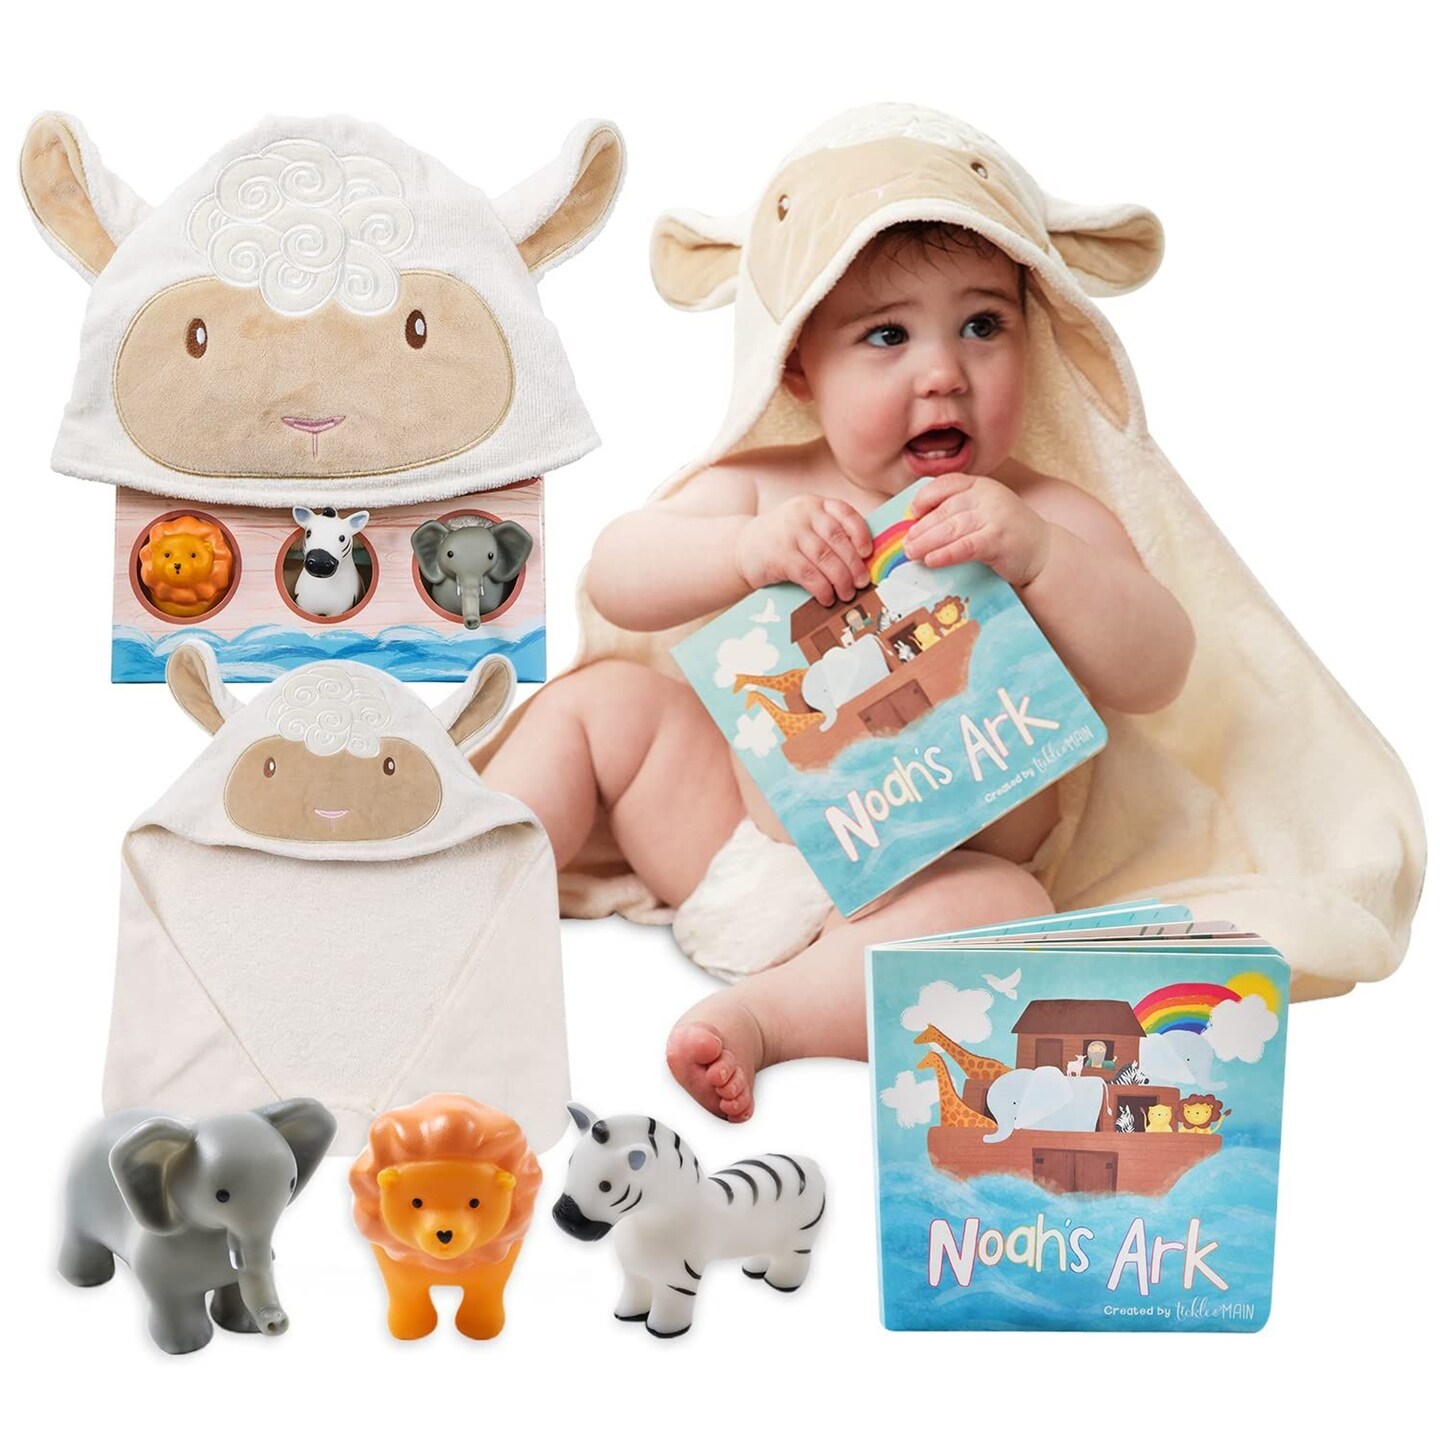 Tickle &#x26; Main Noahs Ark Toy Gift Set, 5-Piece Set Includes Book, Hooded Towel, &#x26; 3 Squirt Toys for Toddlers &#x26; Kids